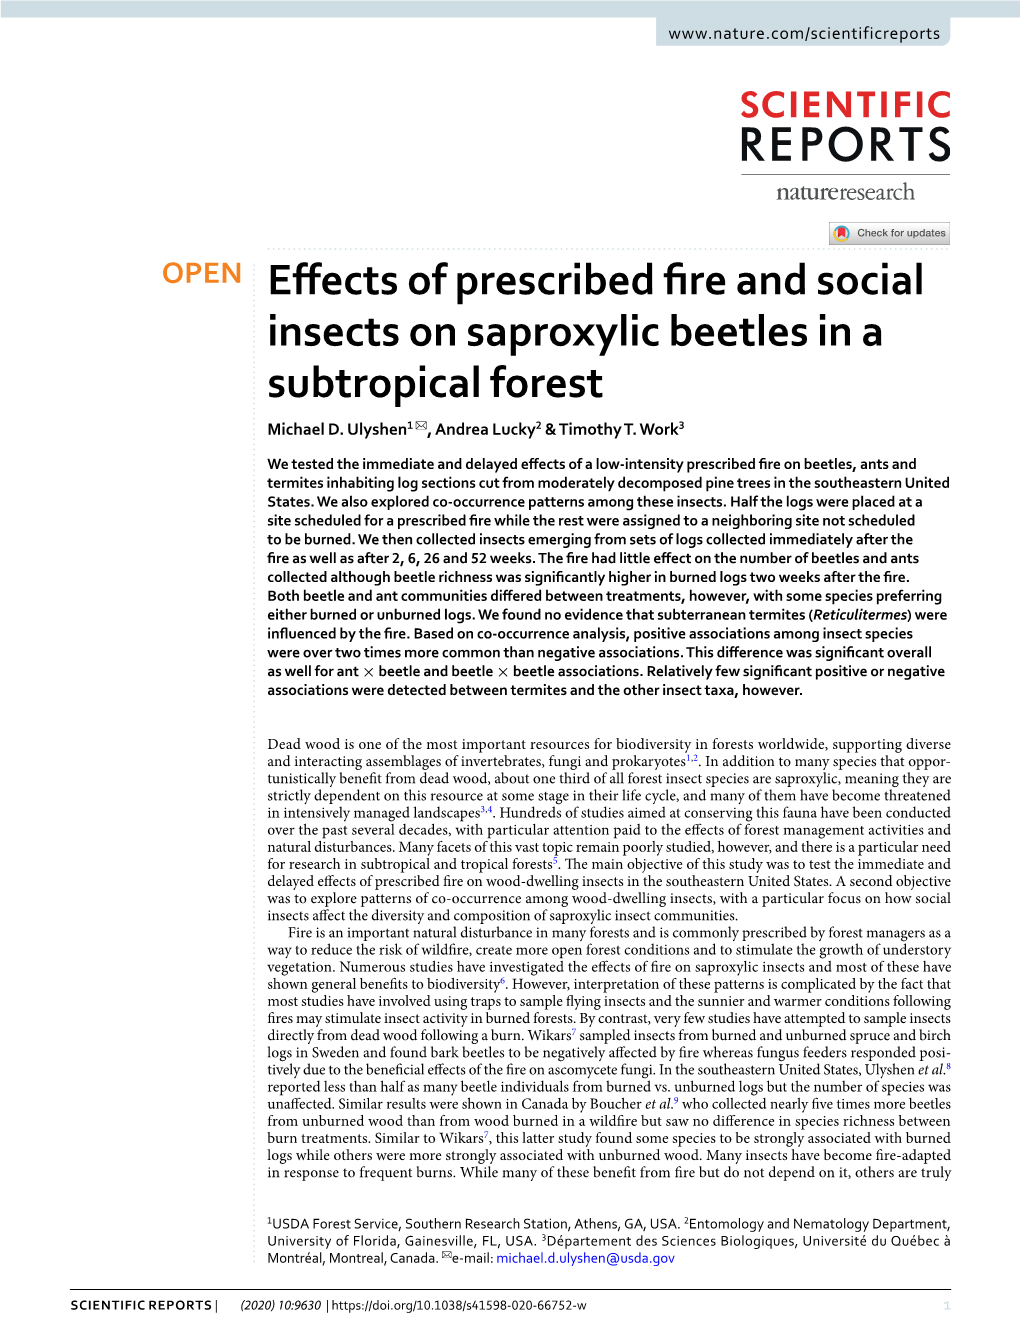 Effects of Prescribed Fire and Social Insects on Saproxylic Beetles in a Subtropical Forest